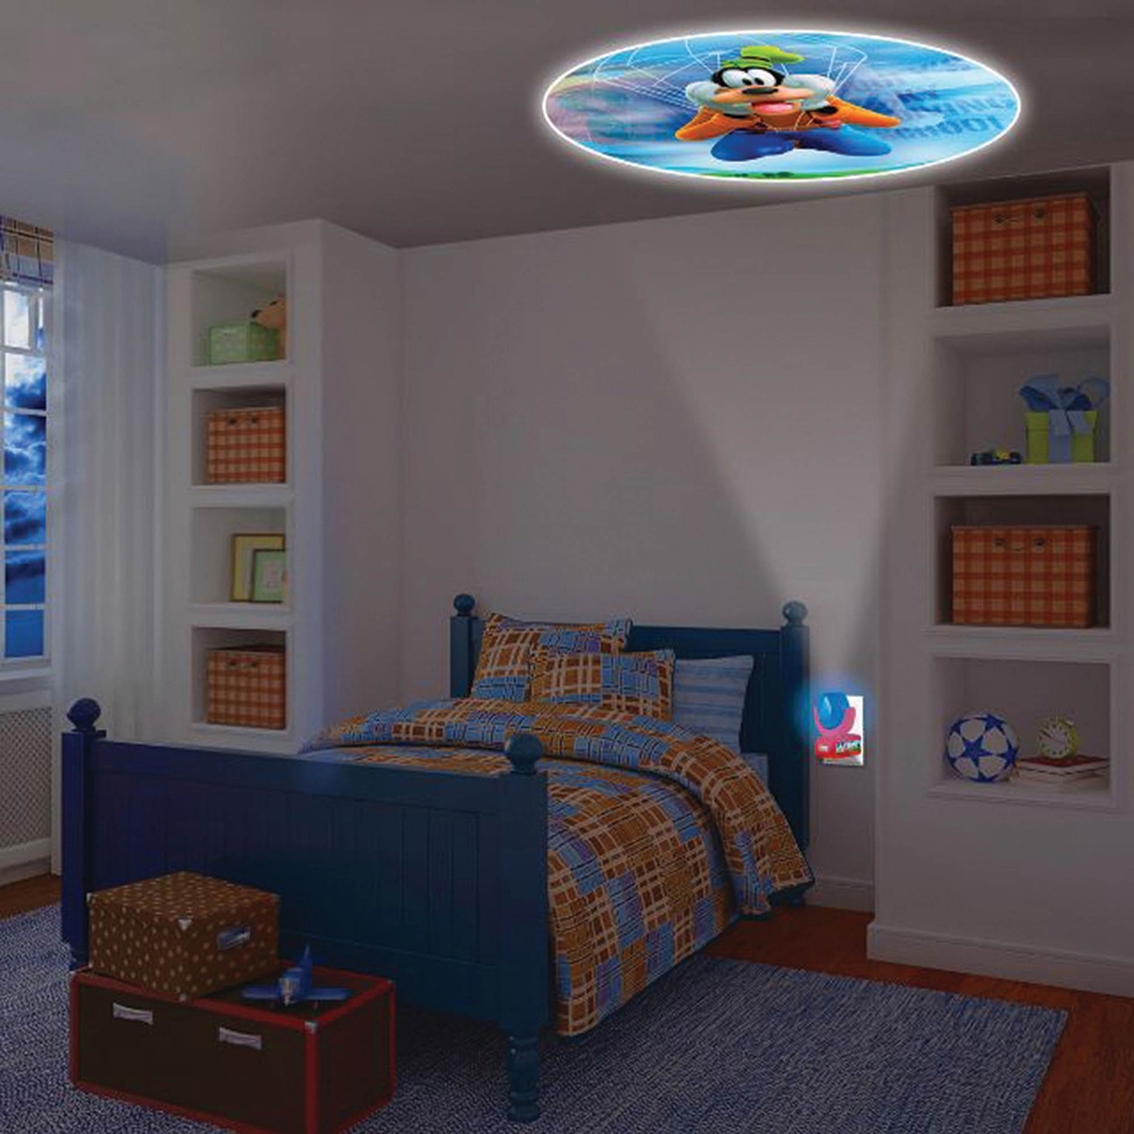 Disney LED Projectables Mickey Mouse Plugin Night Light - Image 4 of 4